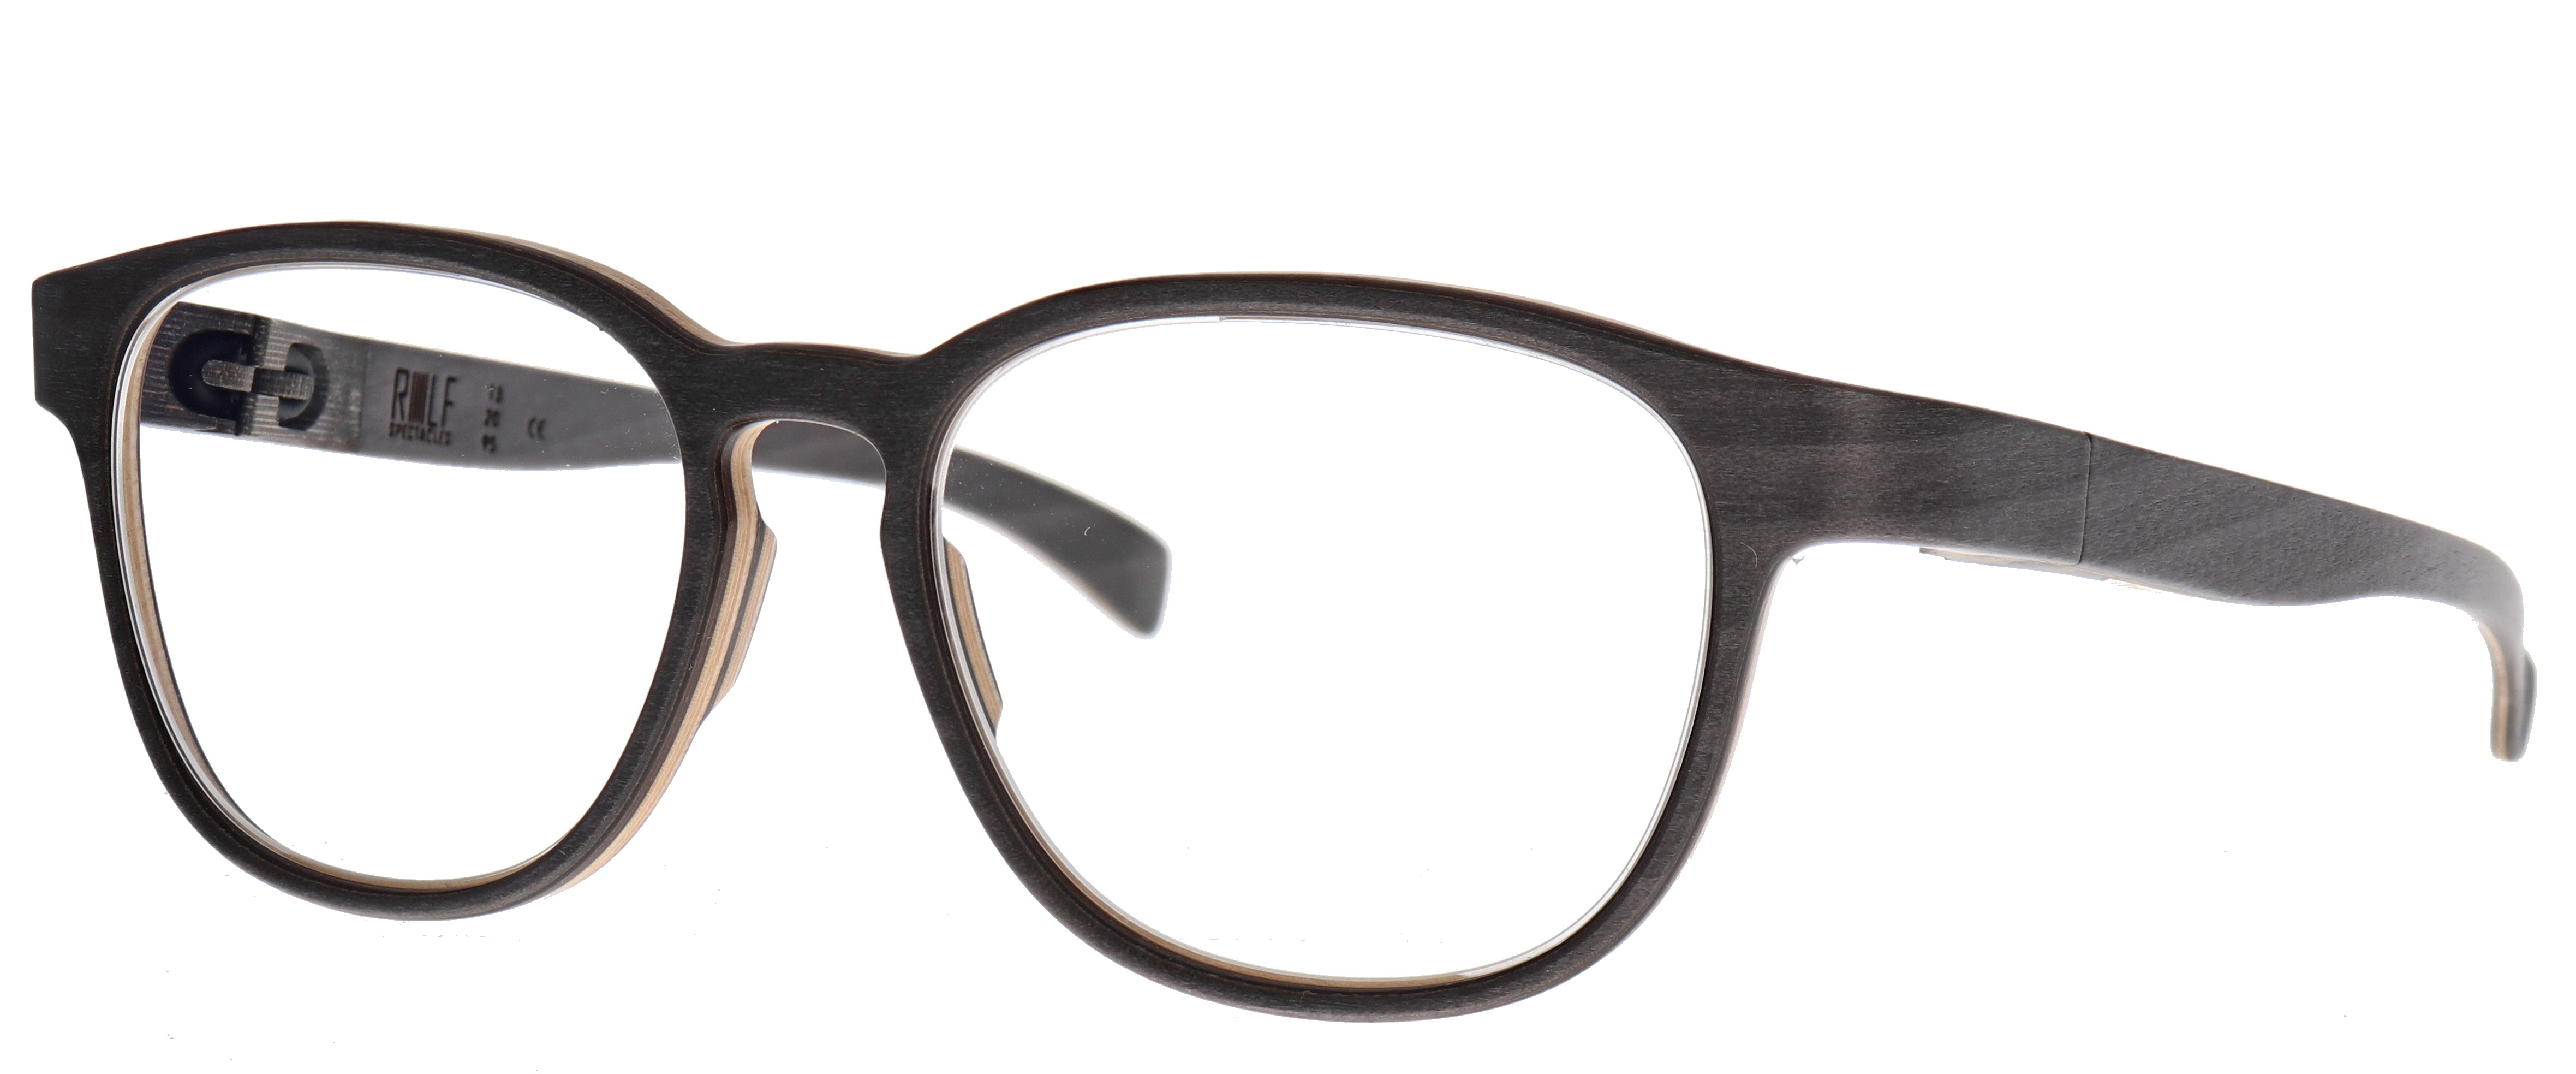 Rolf Spectacles S1